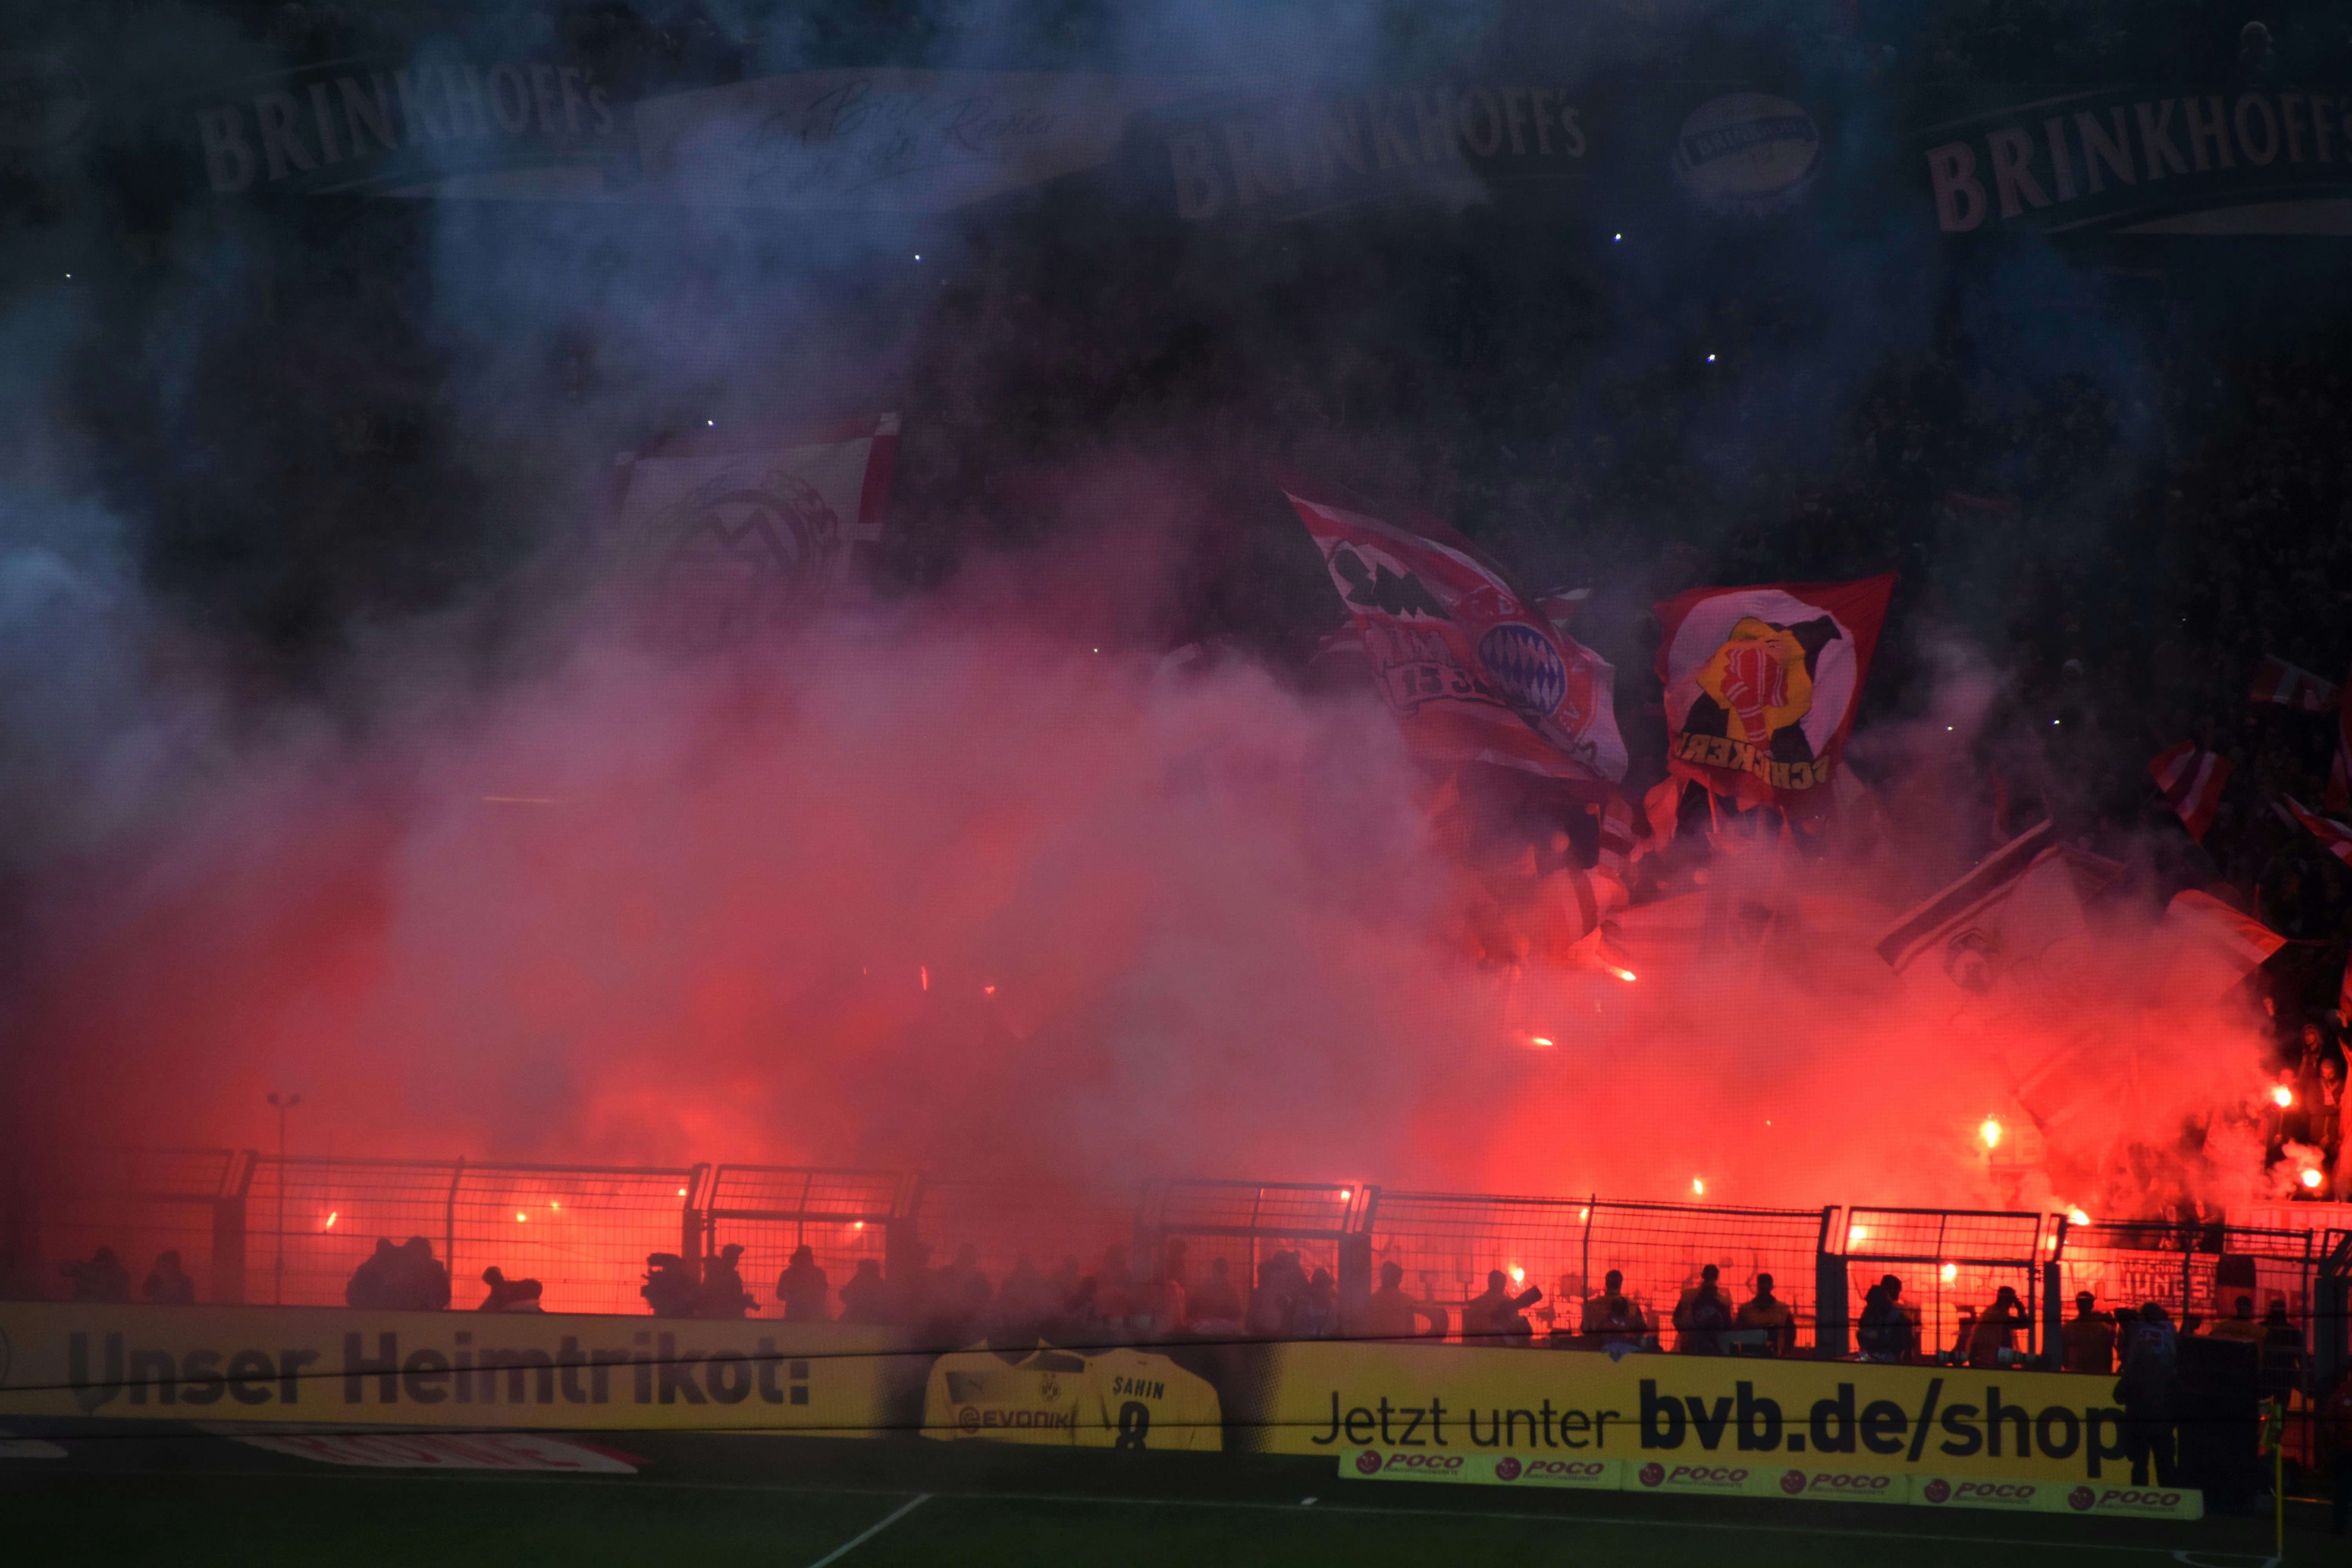 FC Bayern Munich Fans on Fire with Bengalos